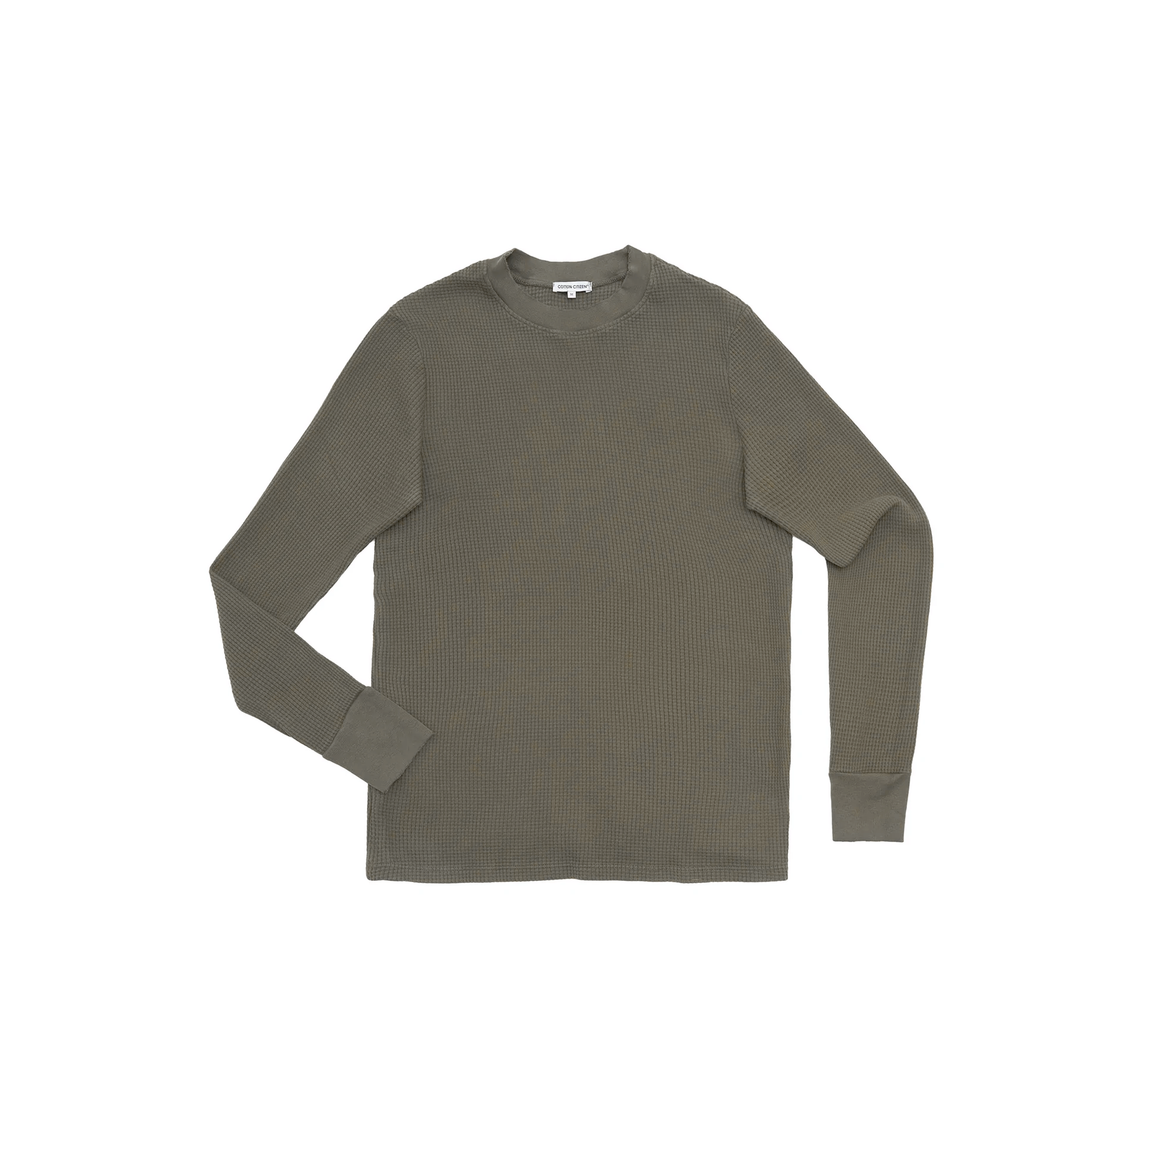 Cotton Citizen Men's Cooper Thermal (Taupe) - Cotton Citizen Men's Cooper Thermal (Taupe) - 